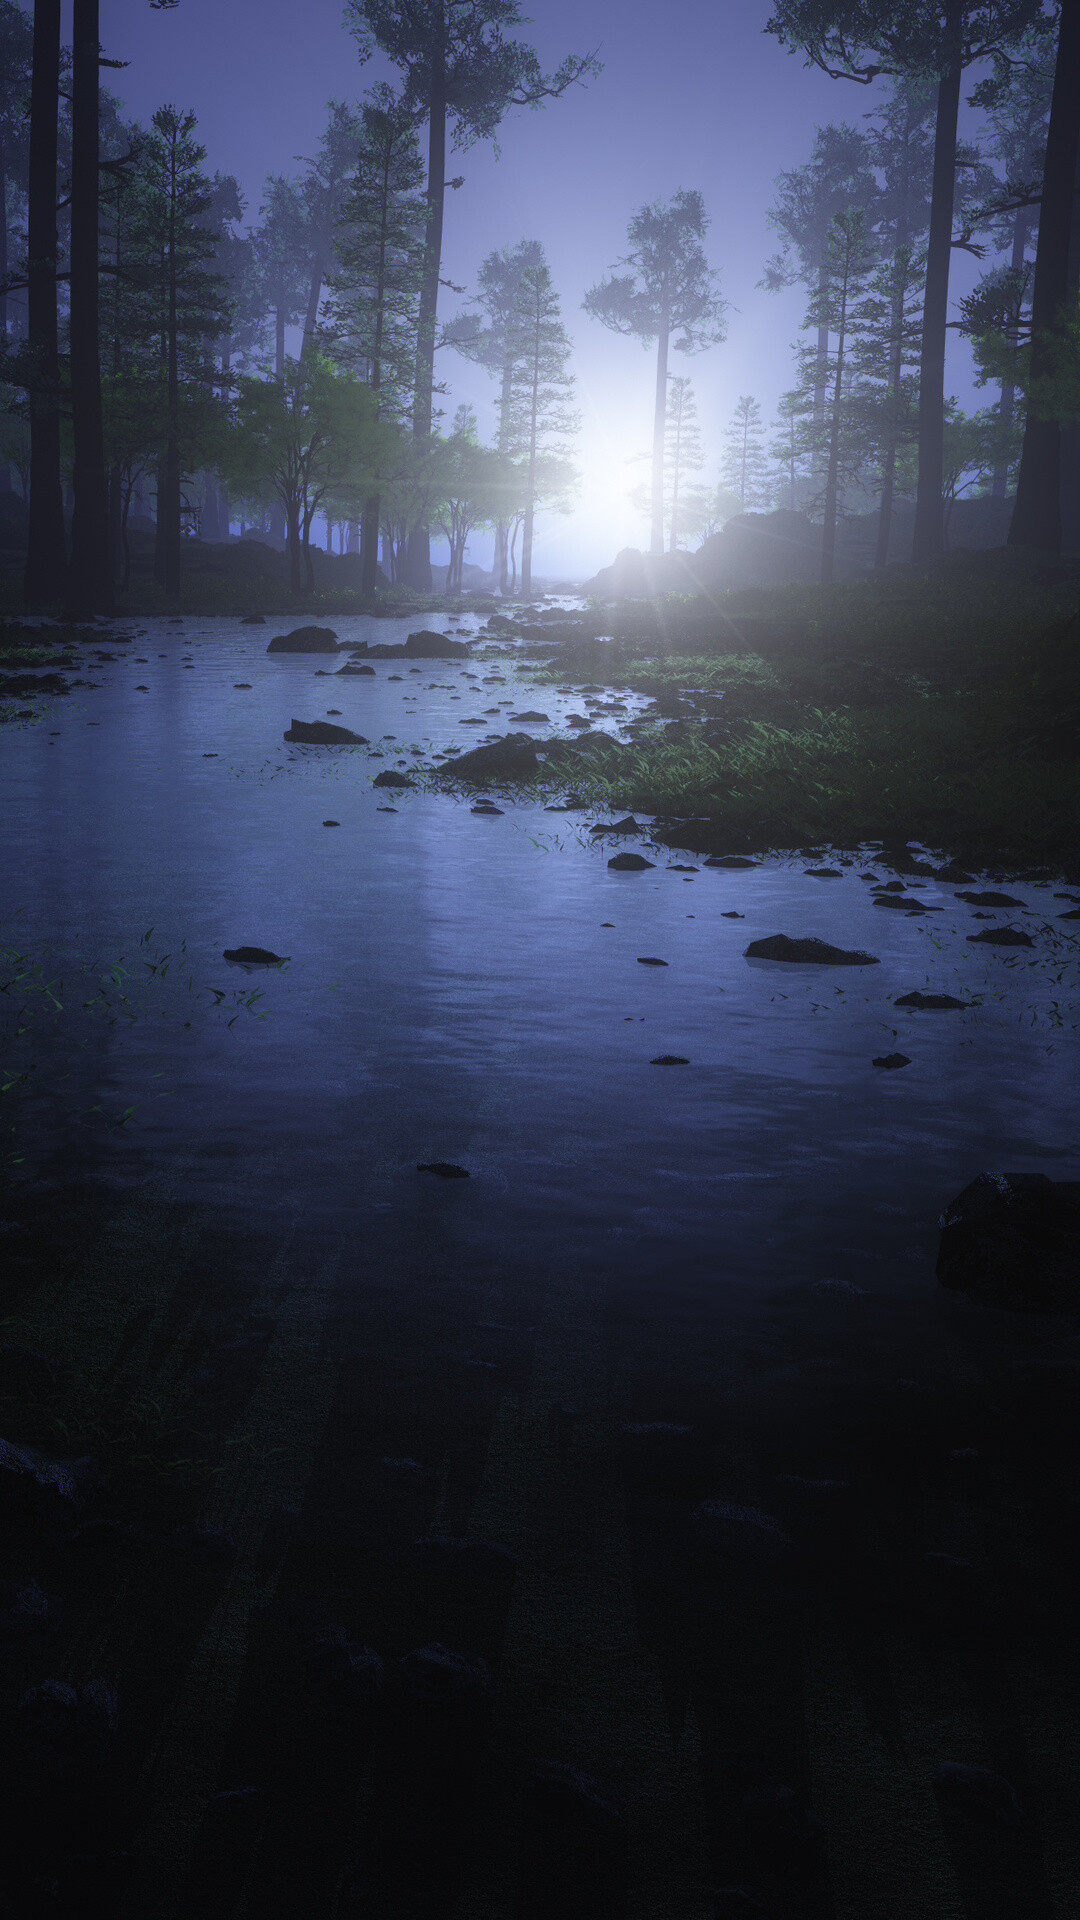 Water stream night forest, iPhone wallpaper, Night beauty, Reflective atmosphere, 1080x1920 Full HD Phone